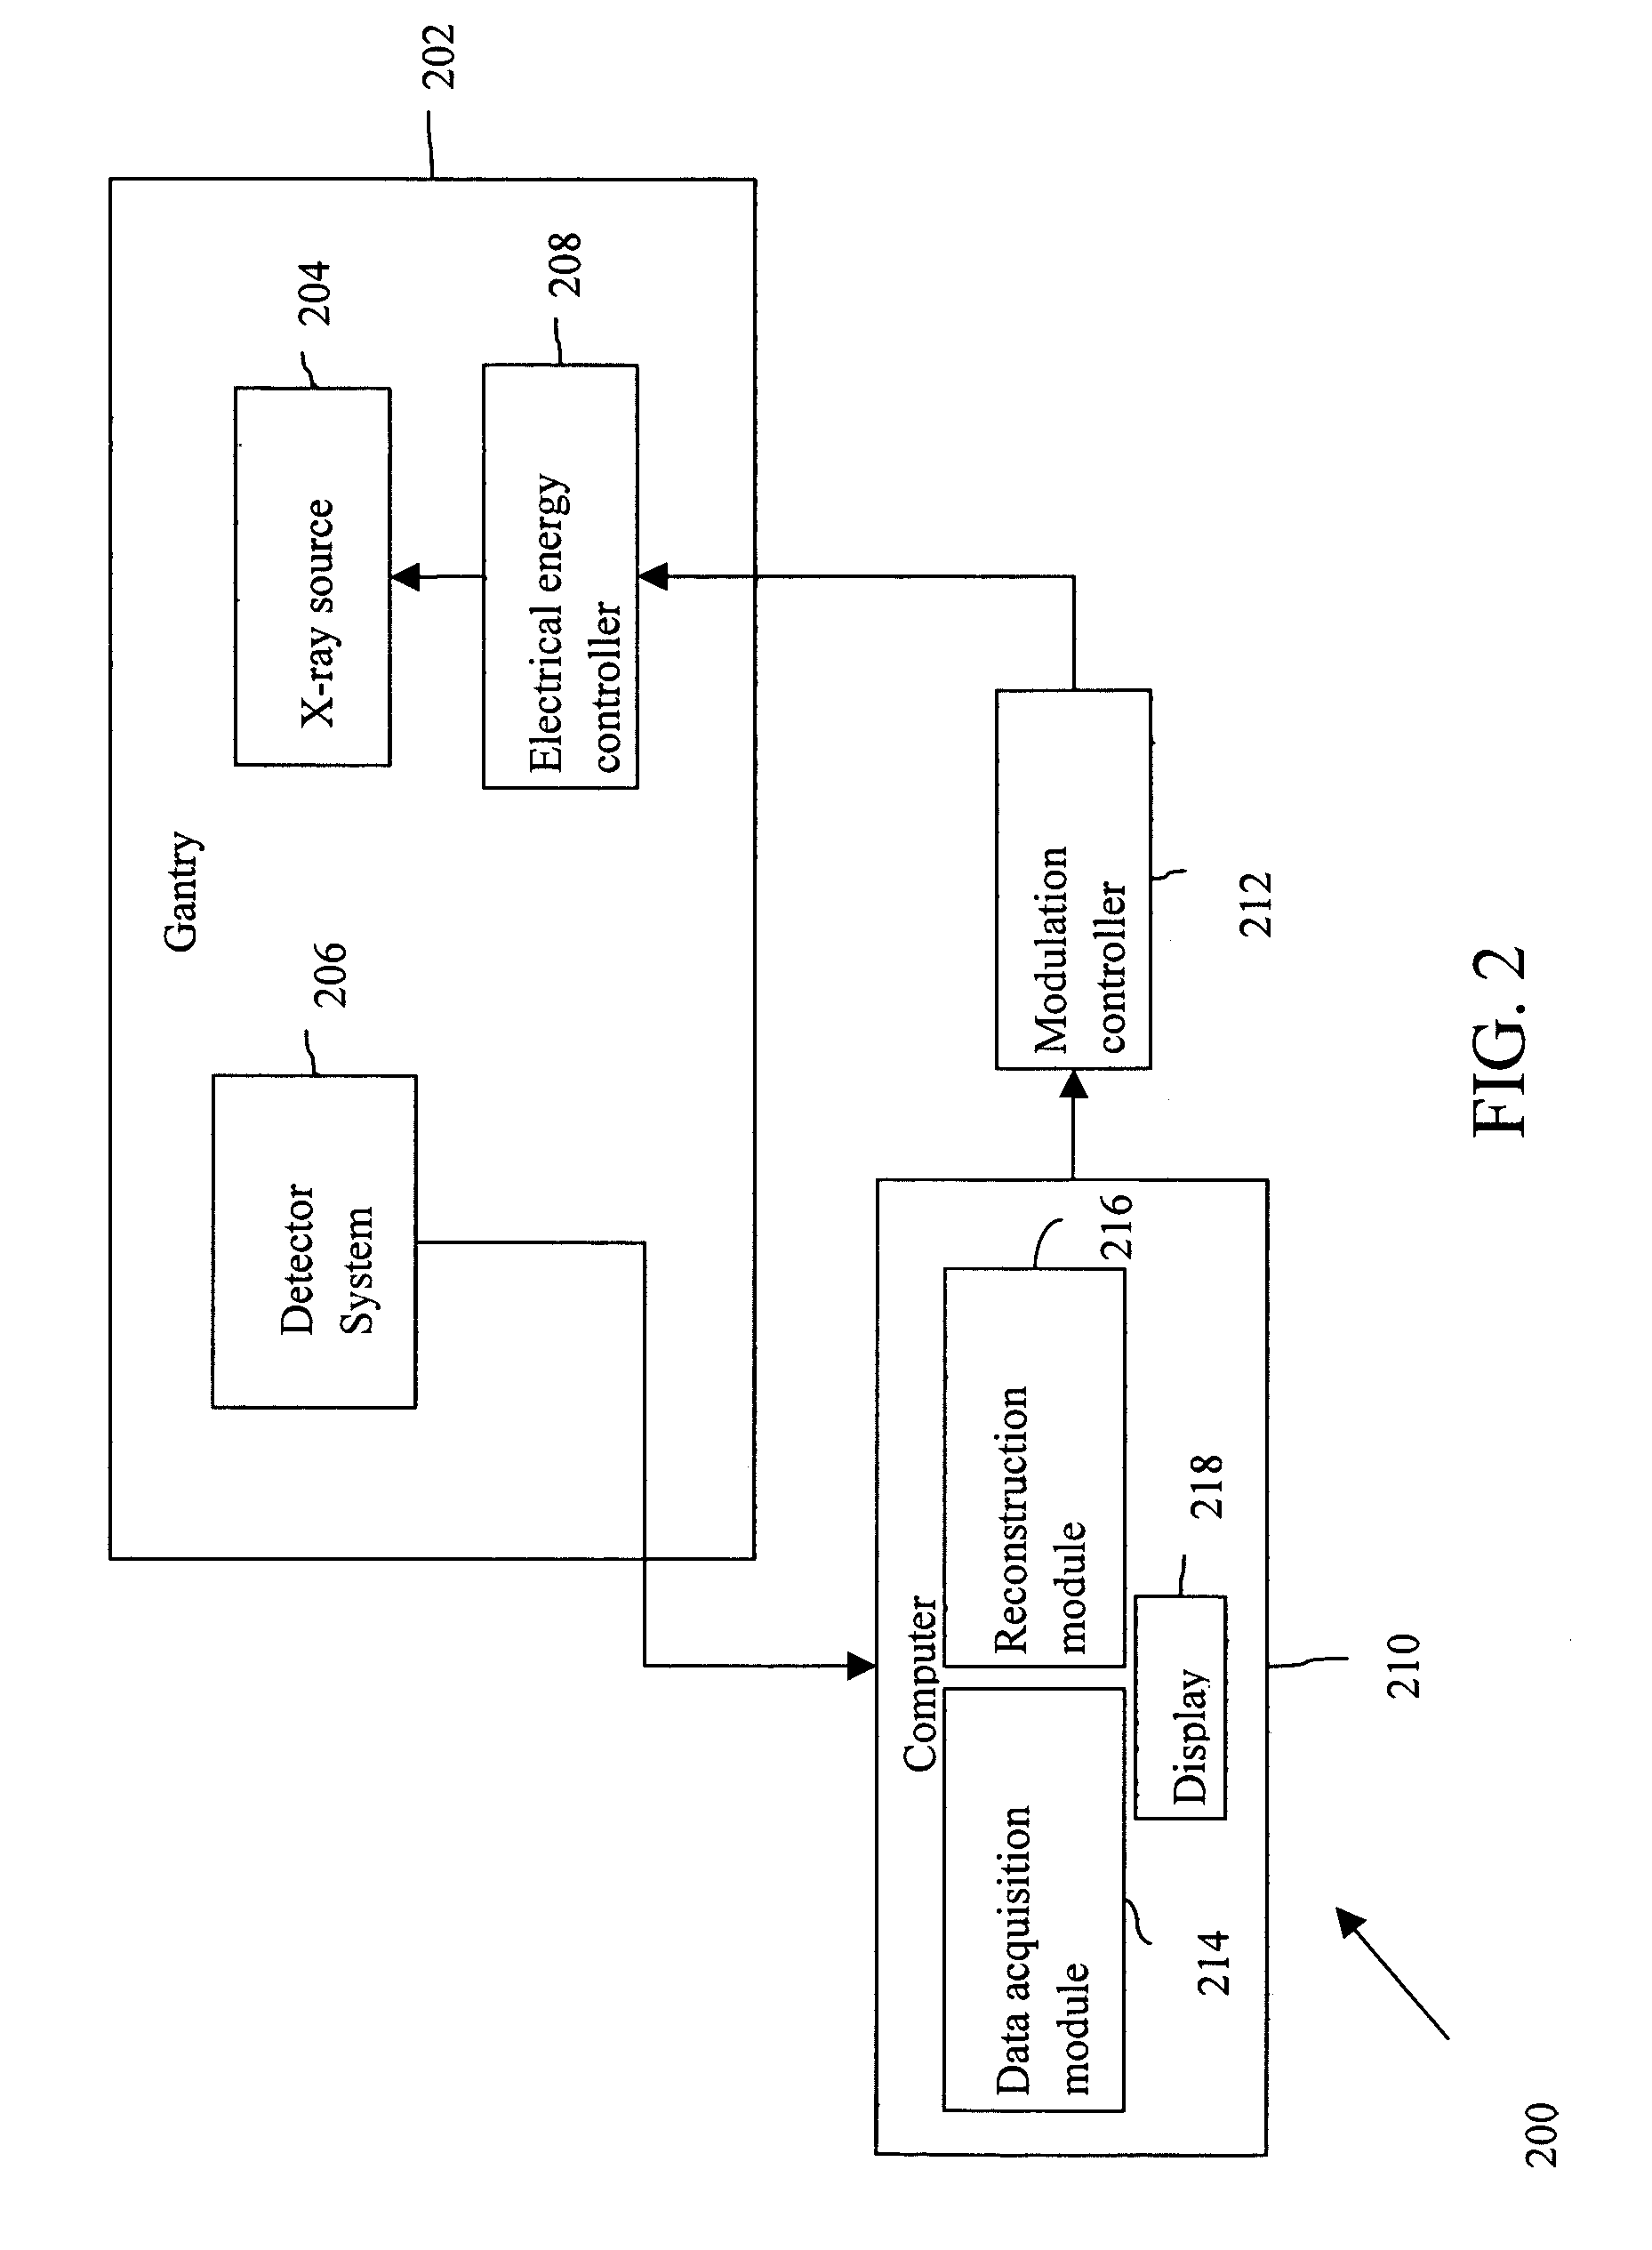 Method and system for controlling an X-ray imaging system